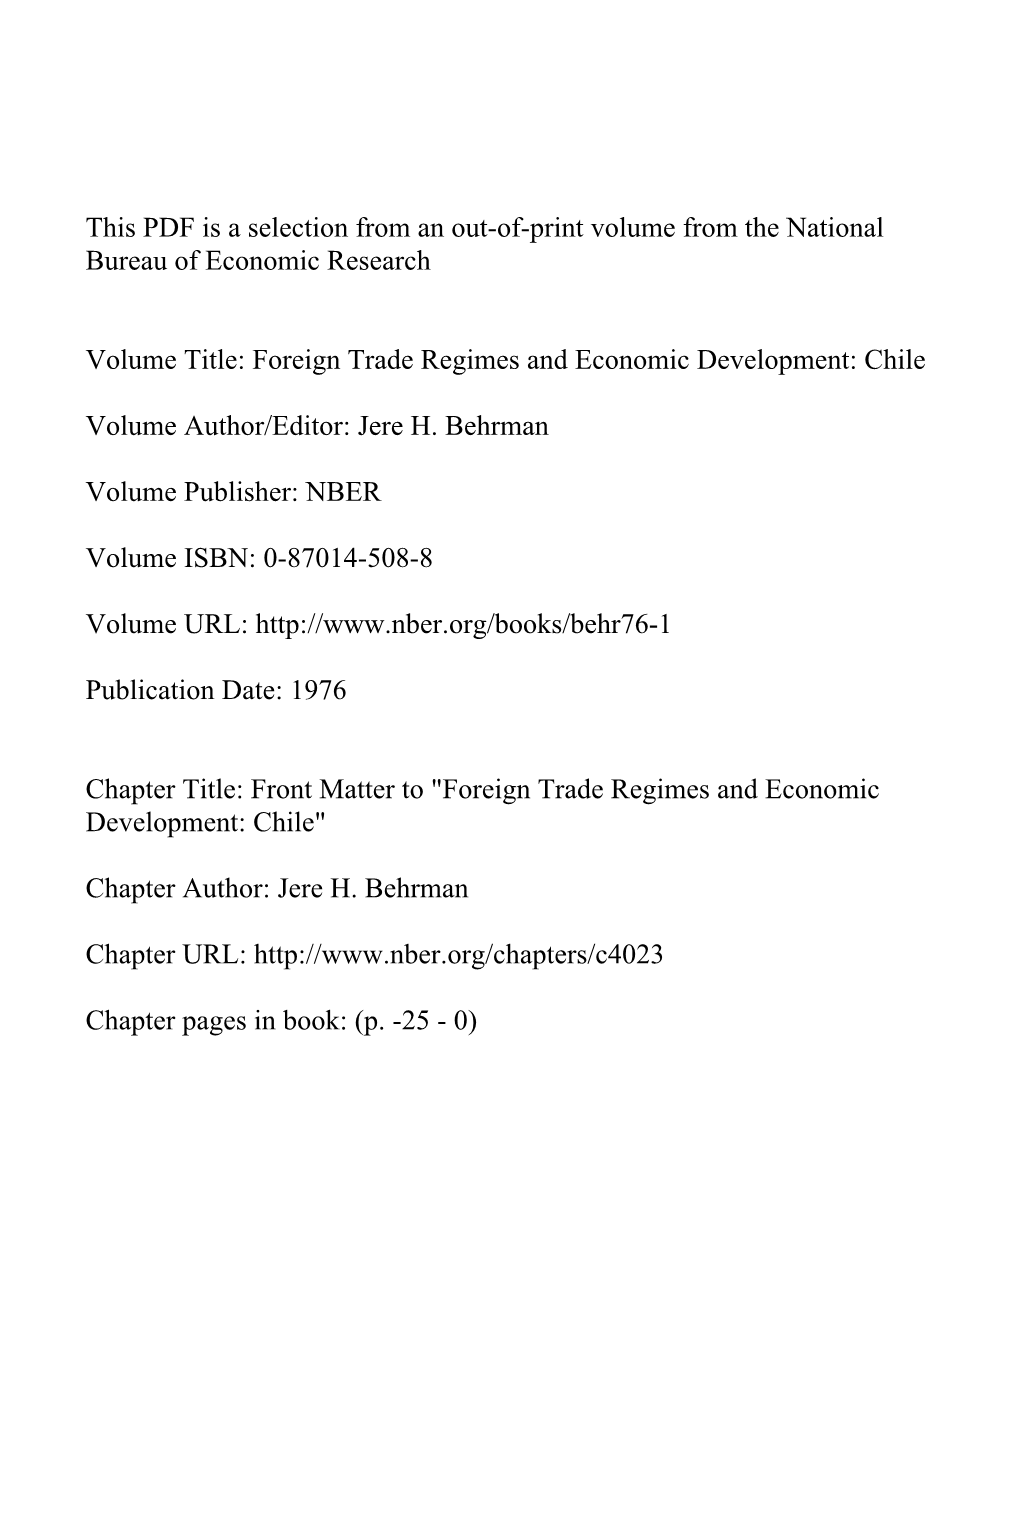 Front Matter To" Foreign Trade Regimes and Economic